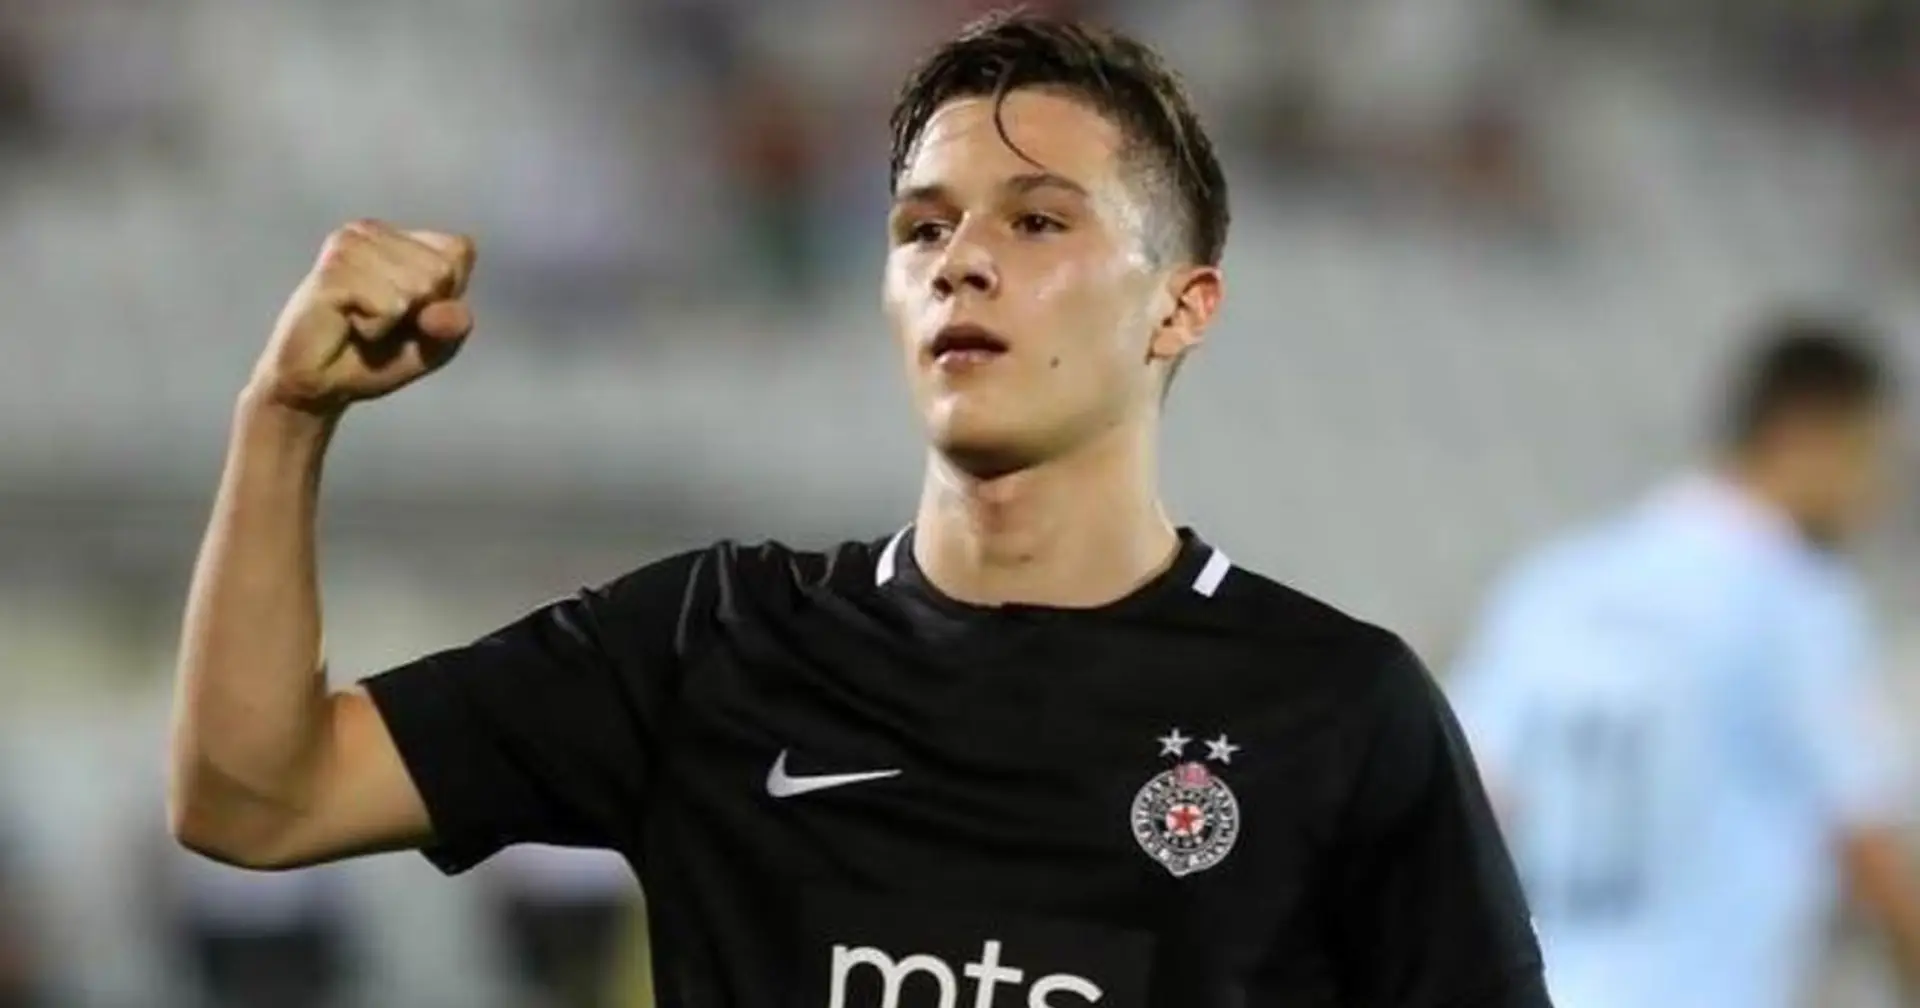 Filip Stevanovic set to join United: Everything about him summed up in 7 points